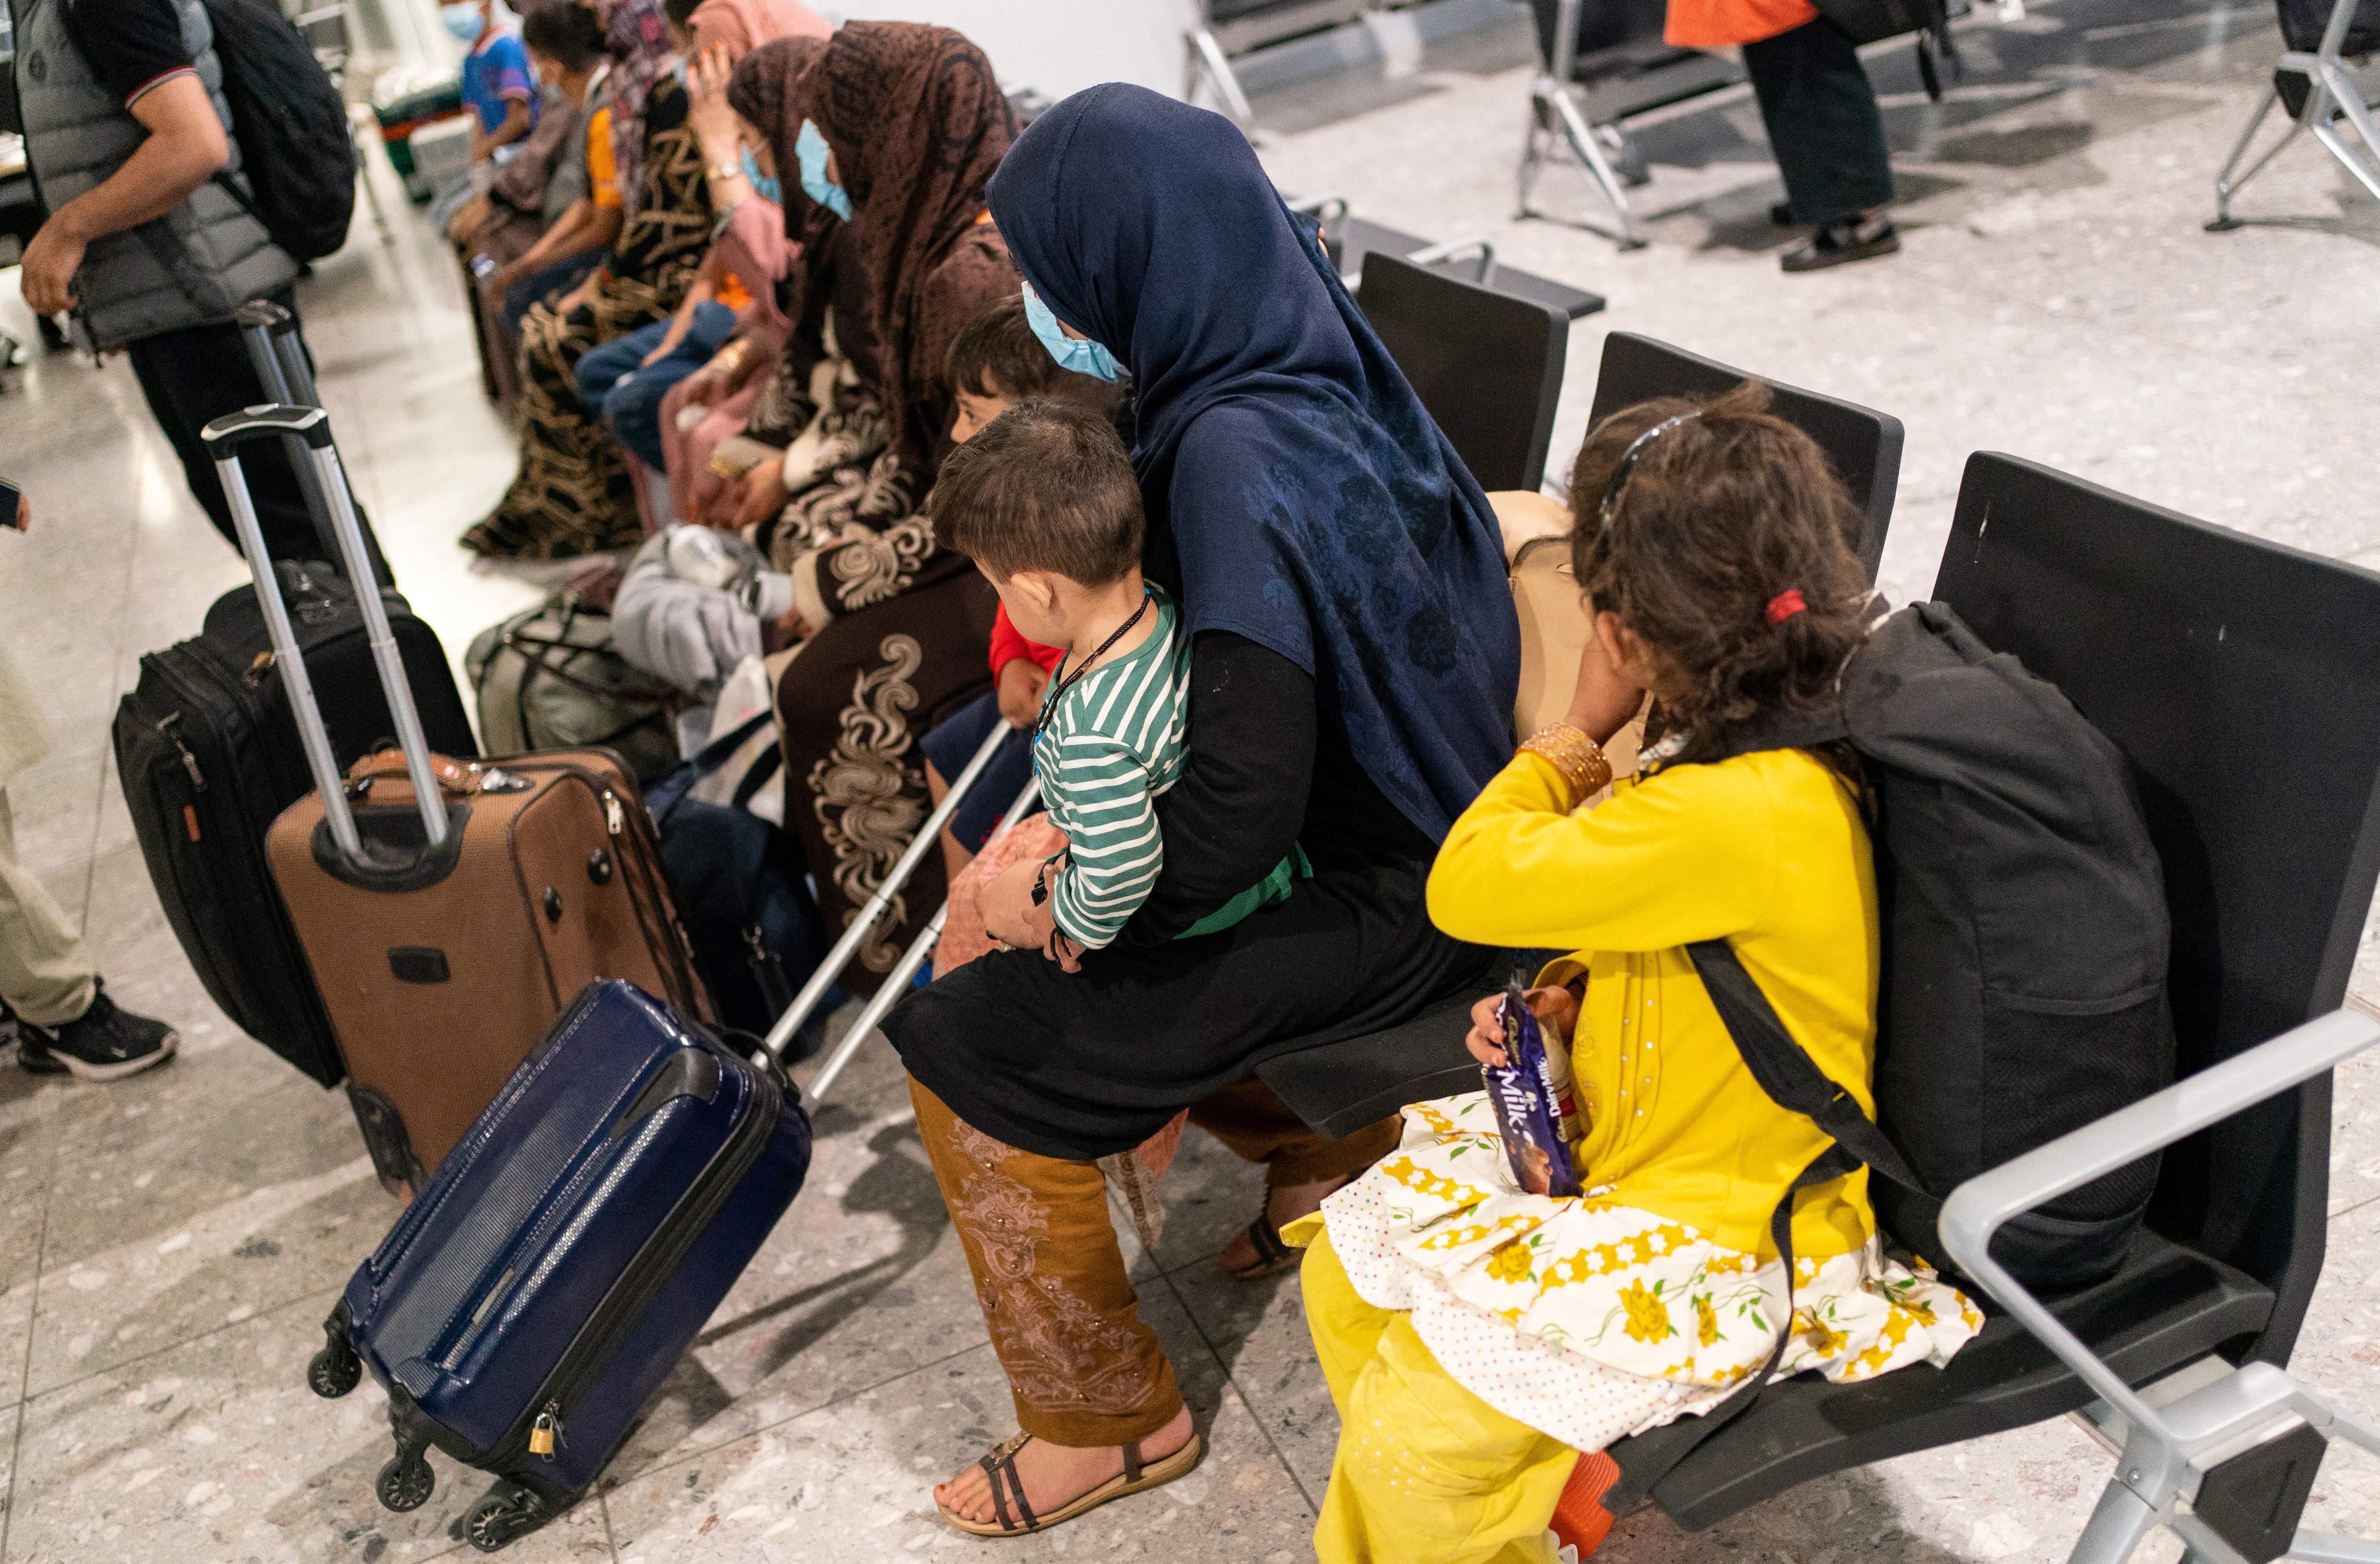 Afghan refugees wait to be processed after arriving on an evacuation flight from Afghanistan, at Heathrow Airport, London on August 26, 2021